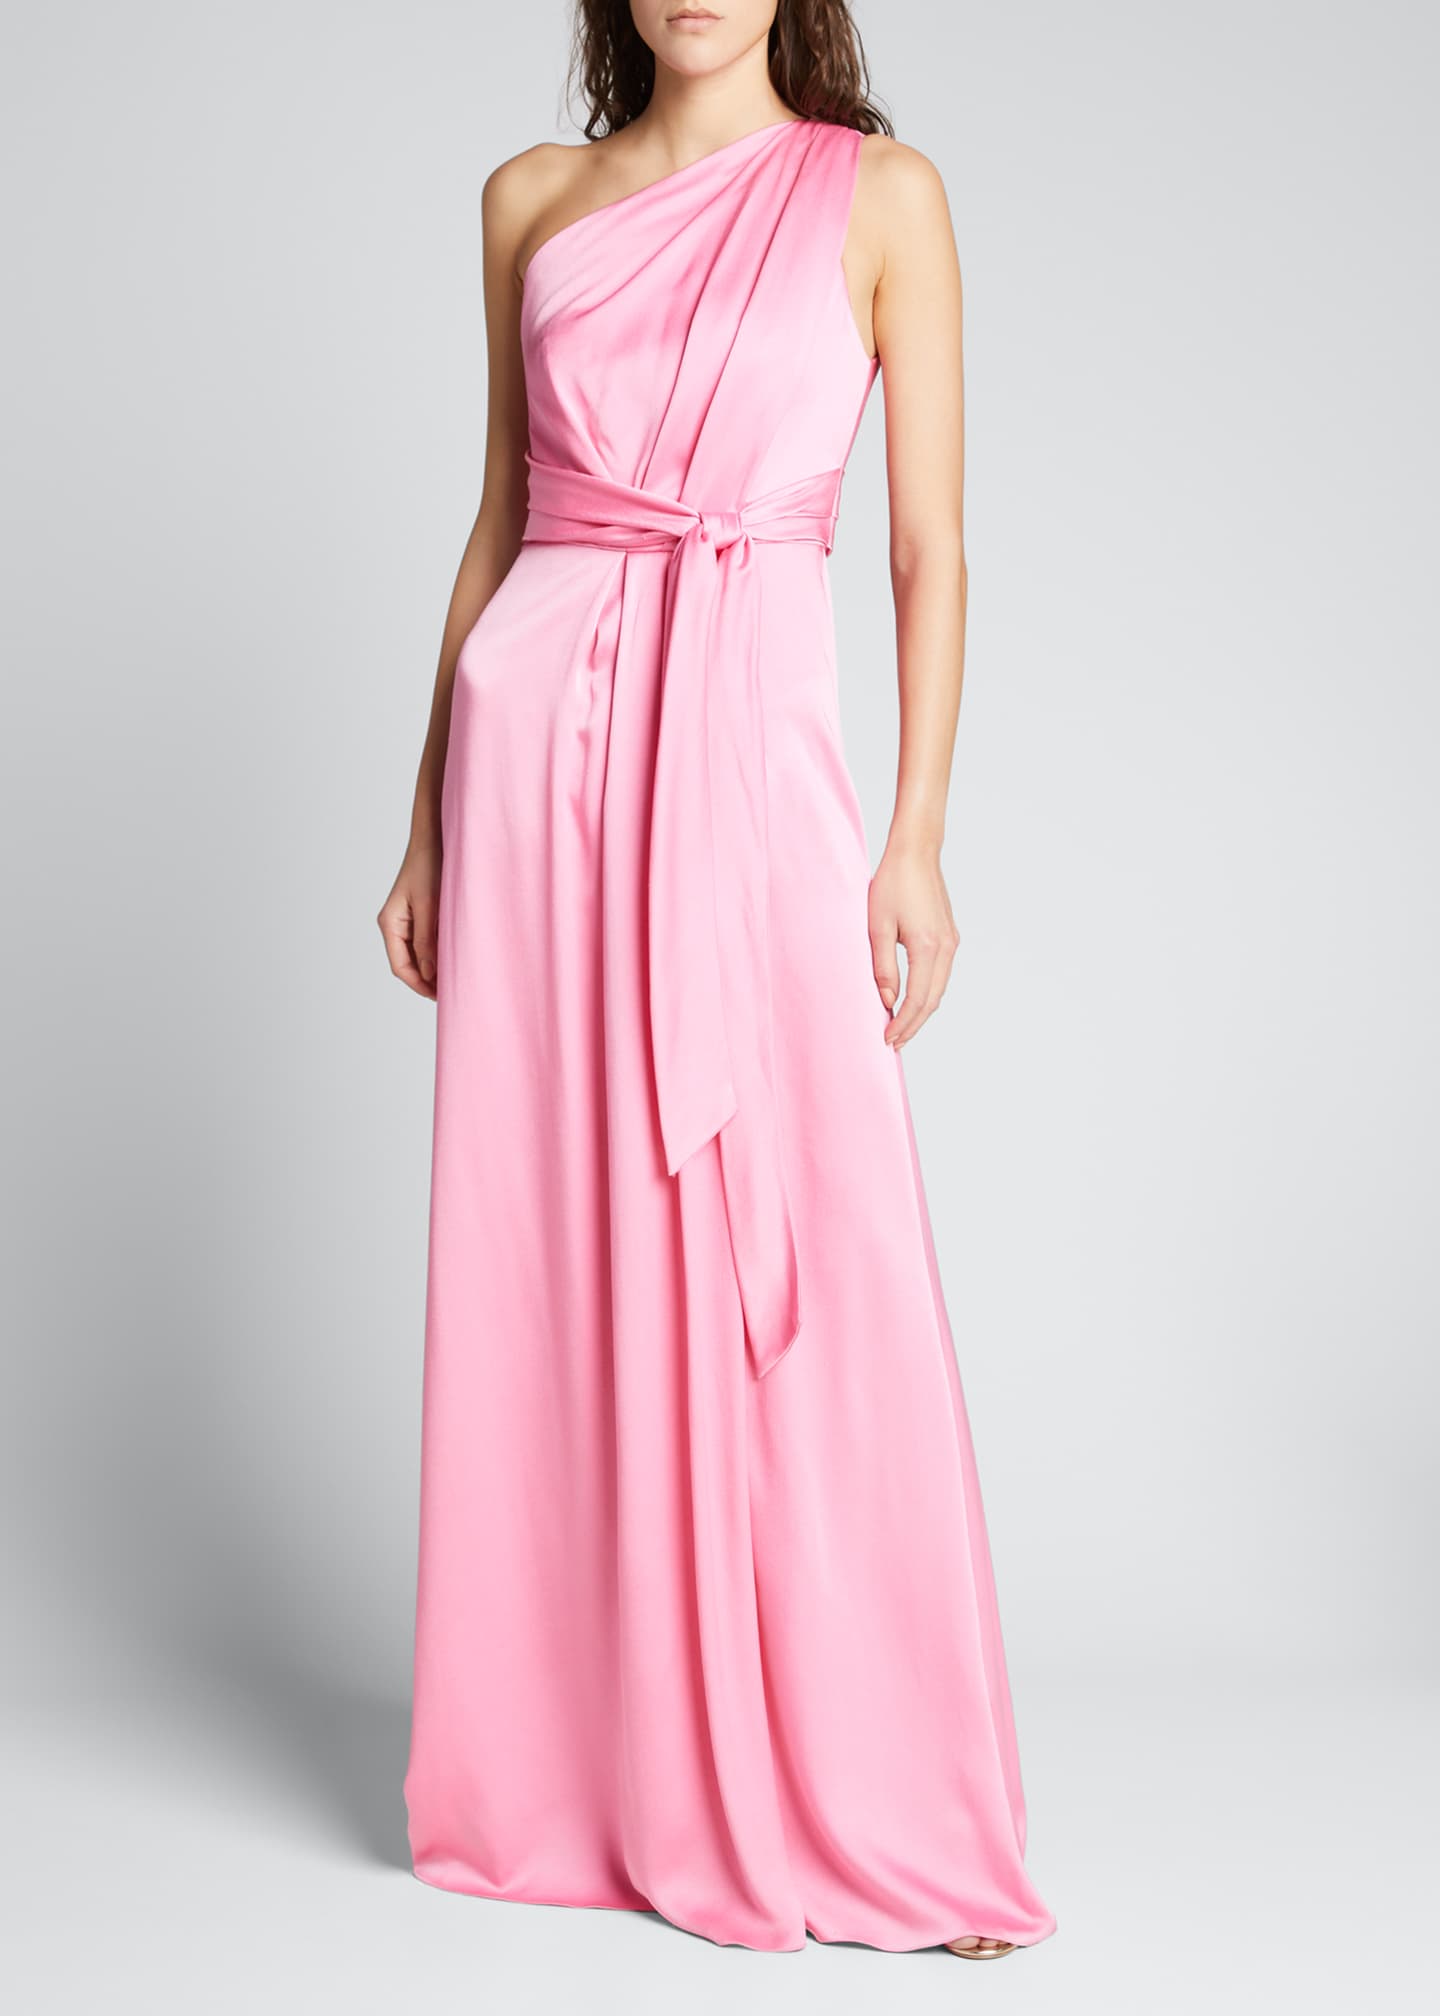 Monique Lhuillier Belted One-Shoulder Draped Gown - Bergdorf Goodman